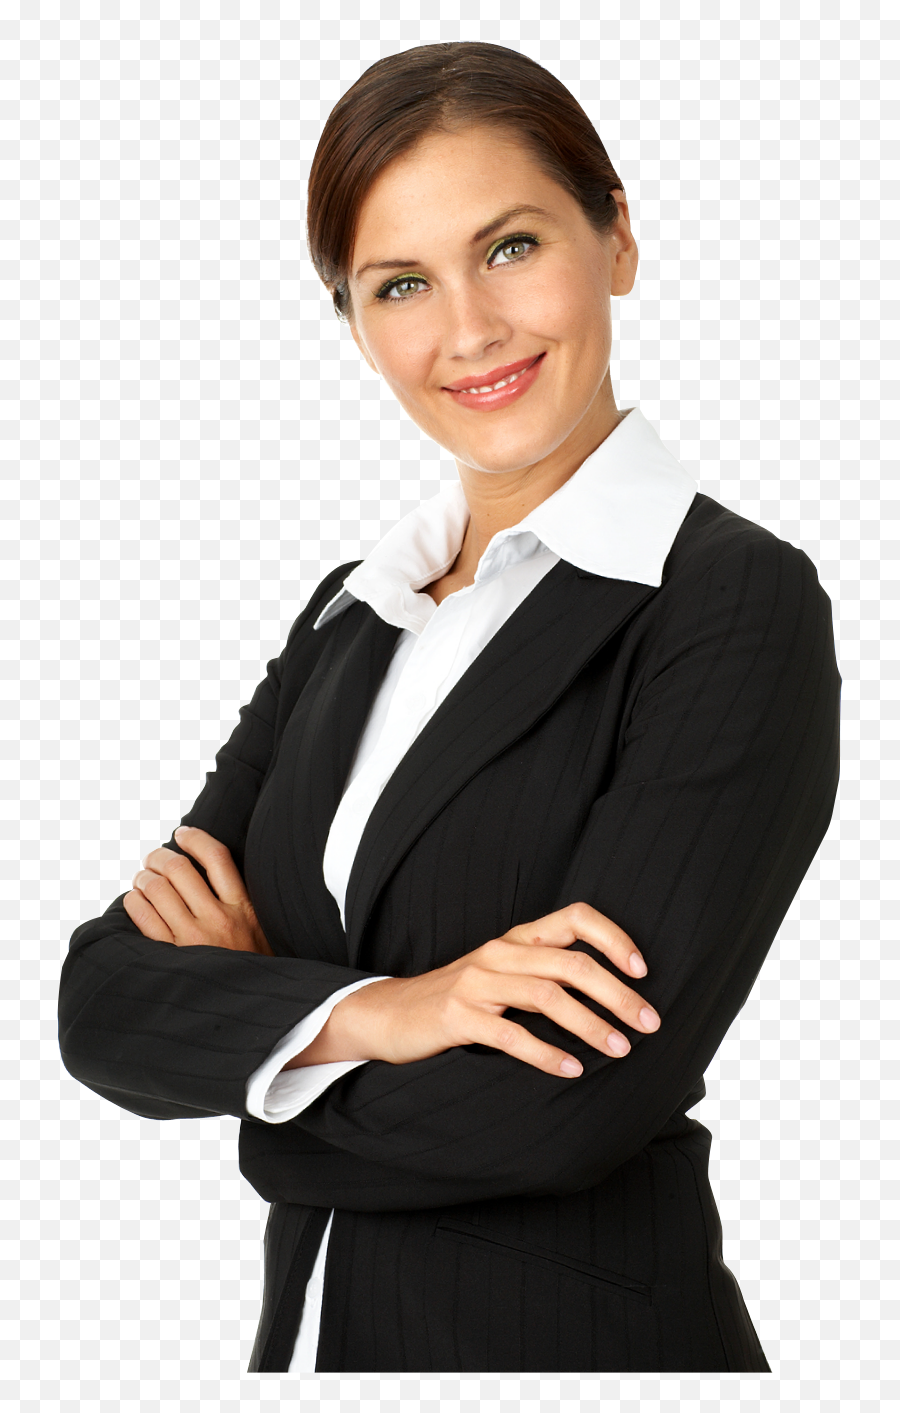 Download Girl - Woman In Suit Png Full Size Png Image Pngkit Empresaria Png,Suit Png